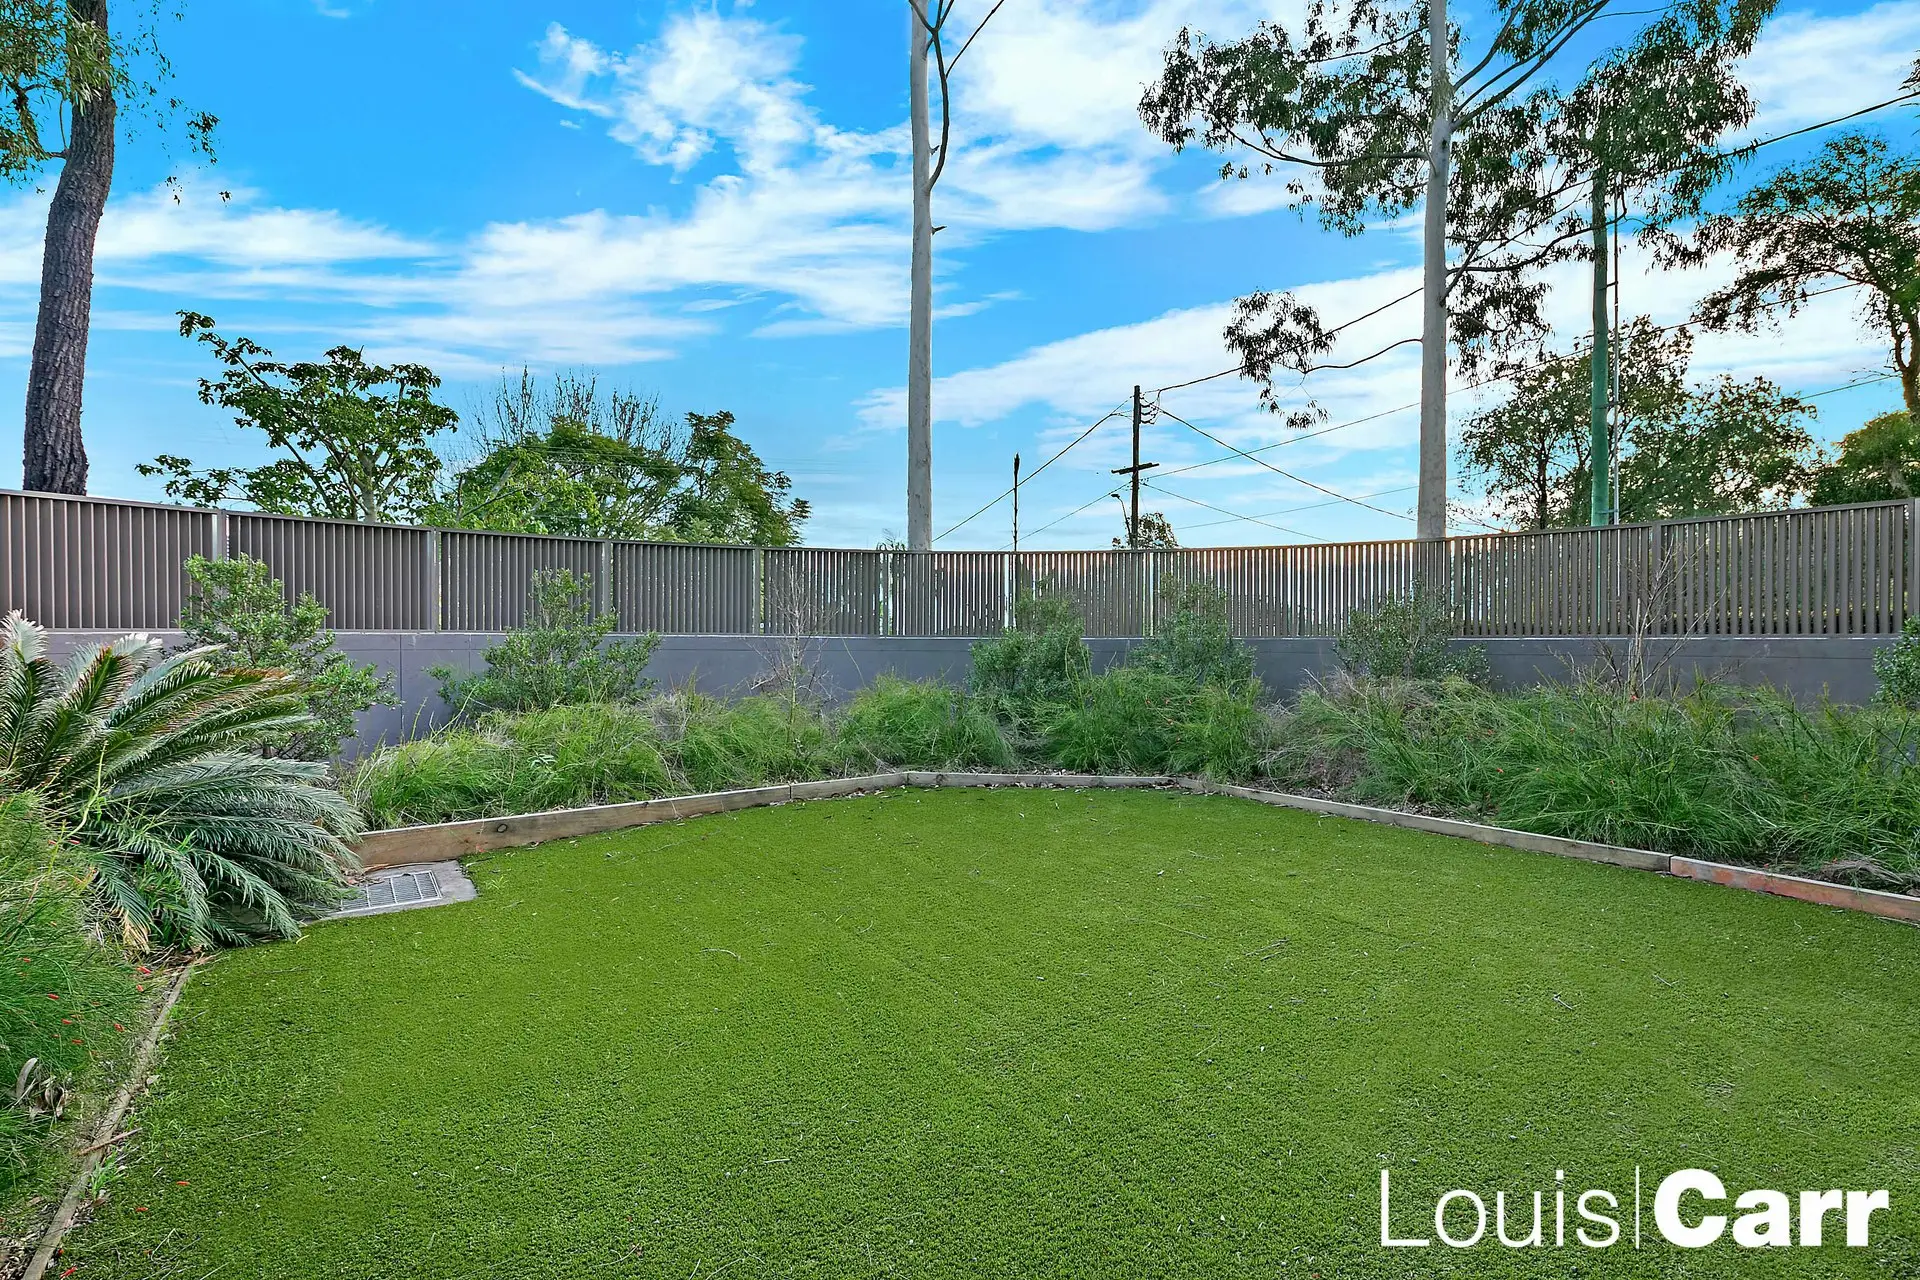 Photo #4: 68/31-39 Sherwin Avenue, Castle Hill - Sold by Louis Carr Real Estate